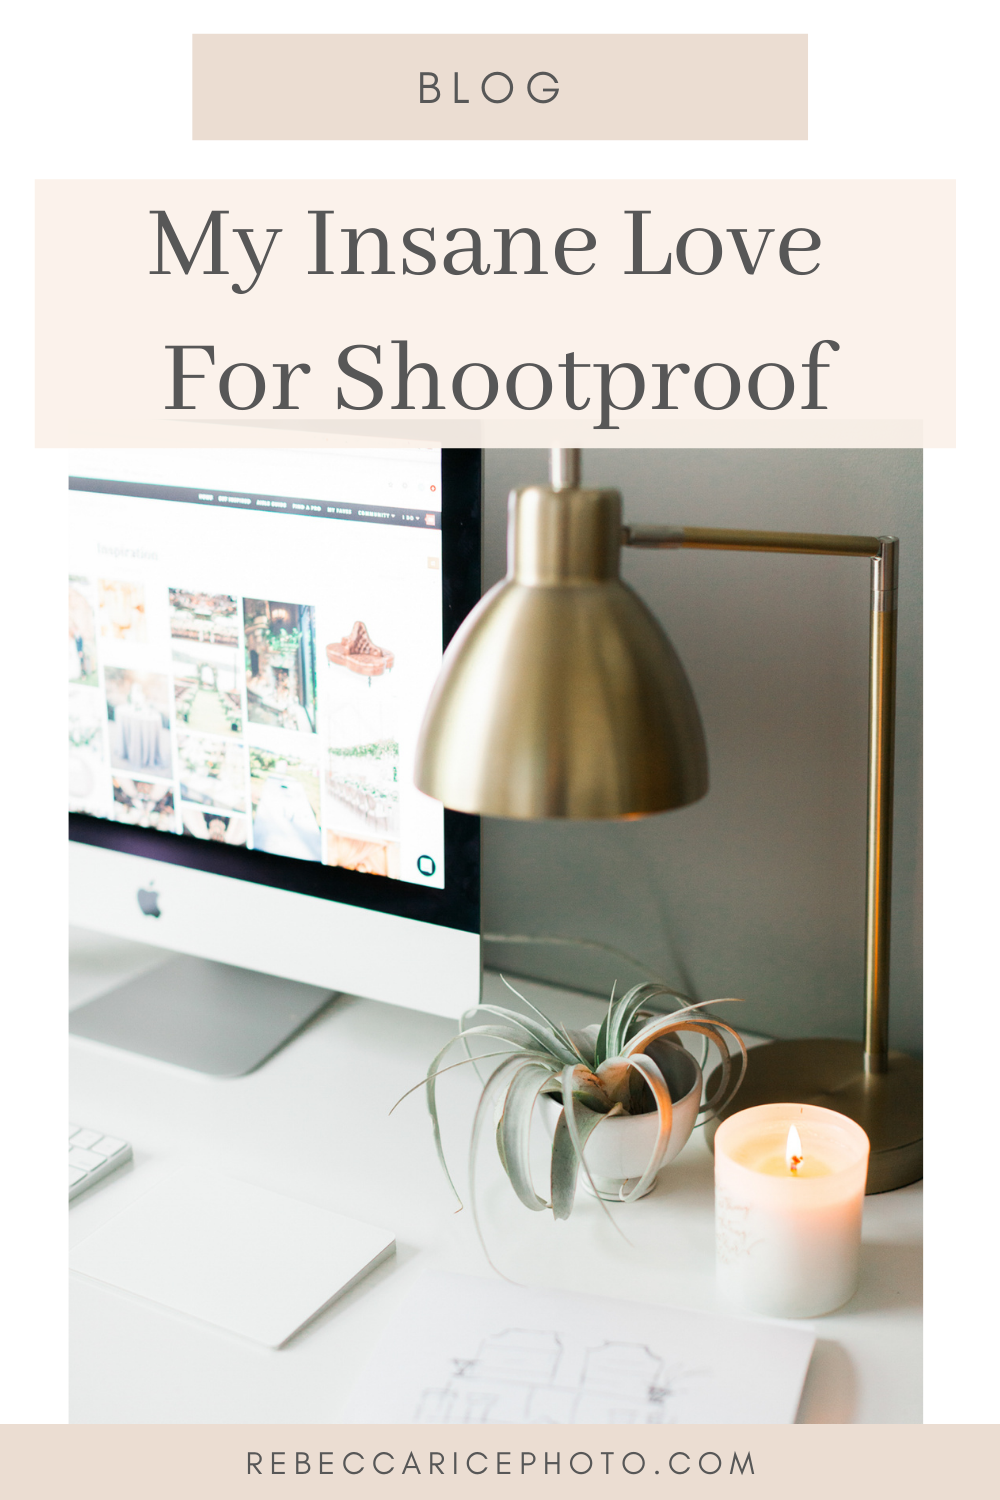 Shootproof: online gallery system for photographers 